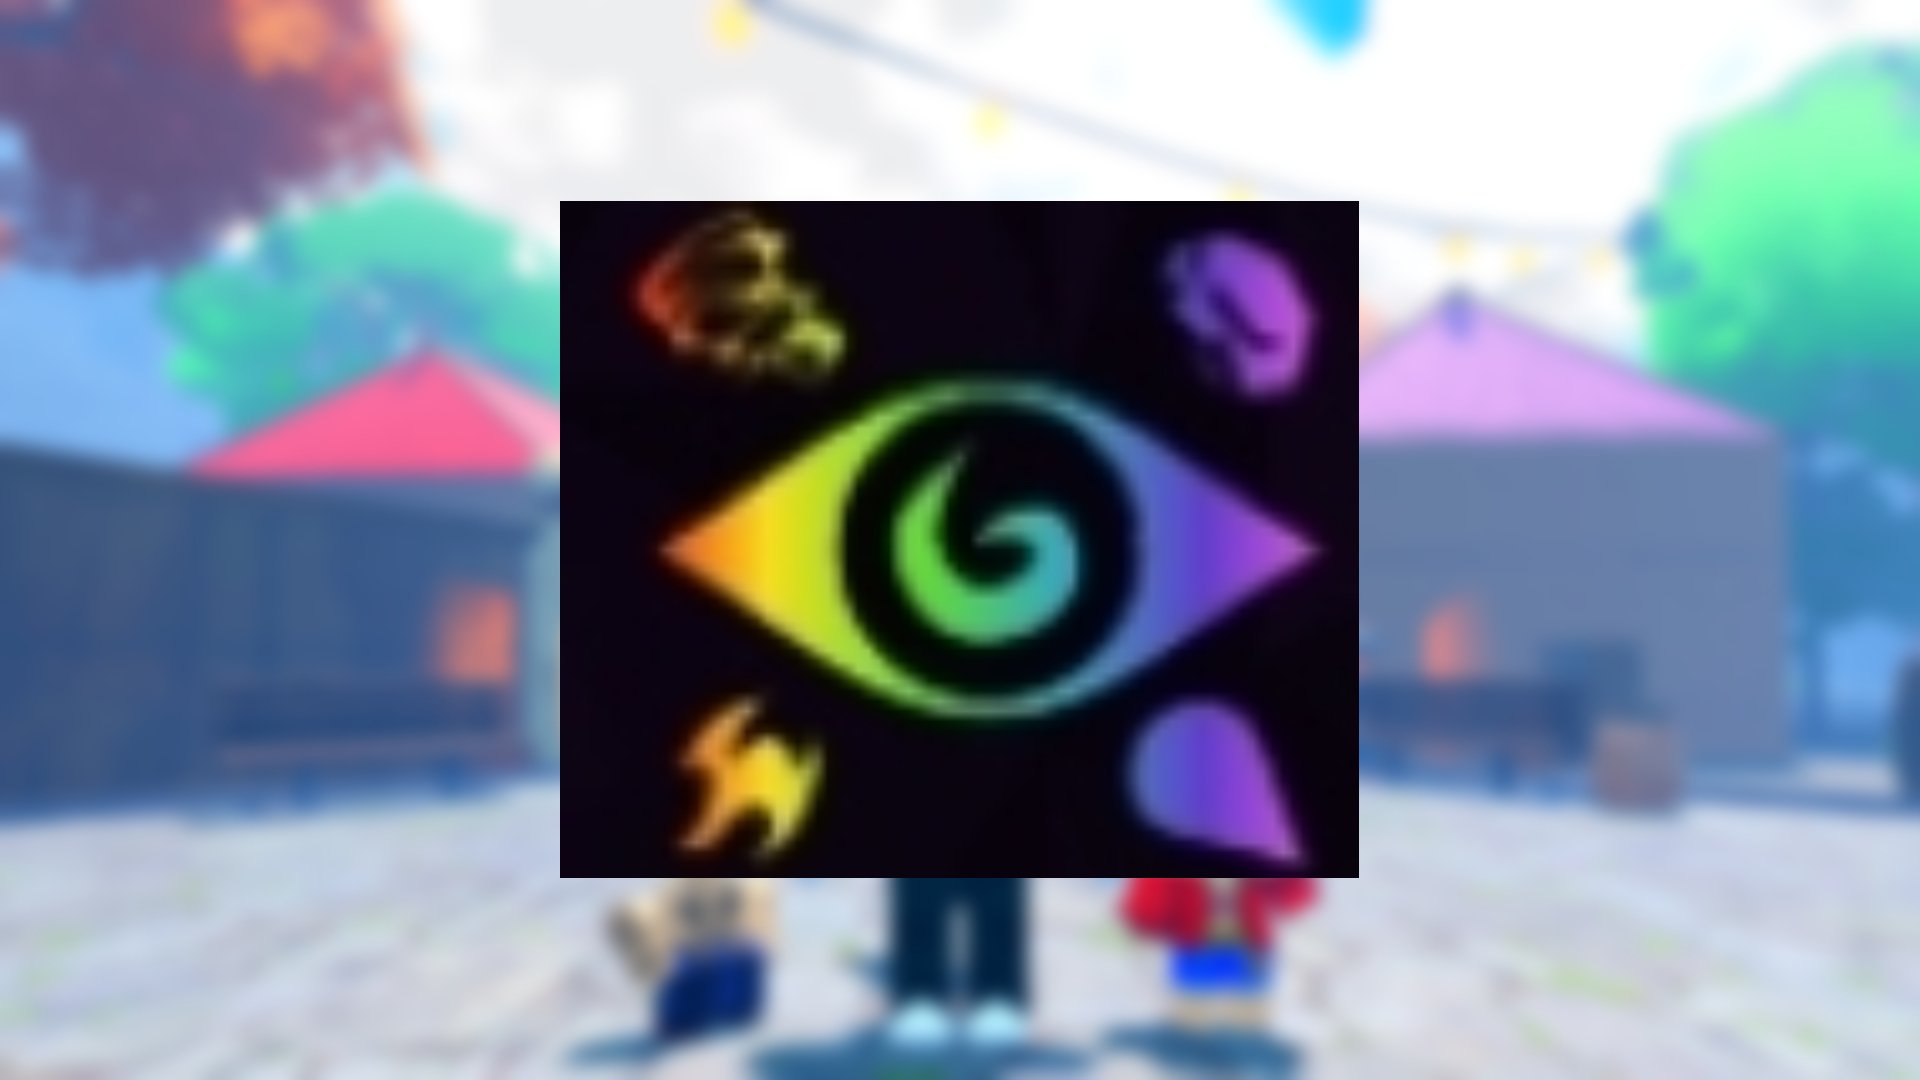 The icon for the Avatar Technique from Roblox game Anime Last Stand. In the background is a blurred screenshot from the game.